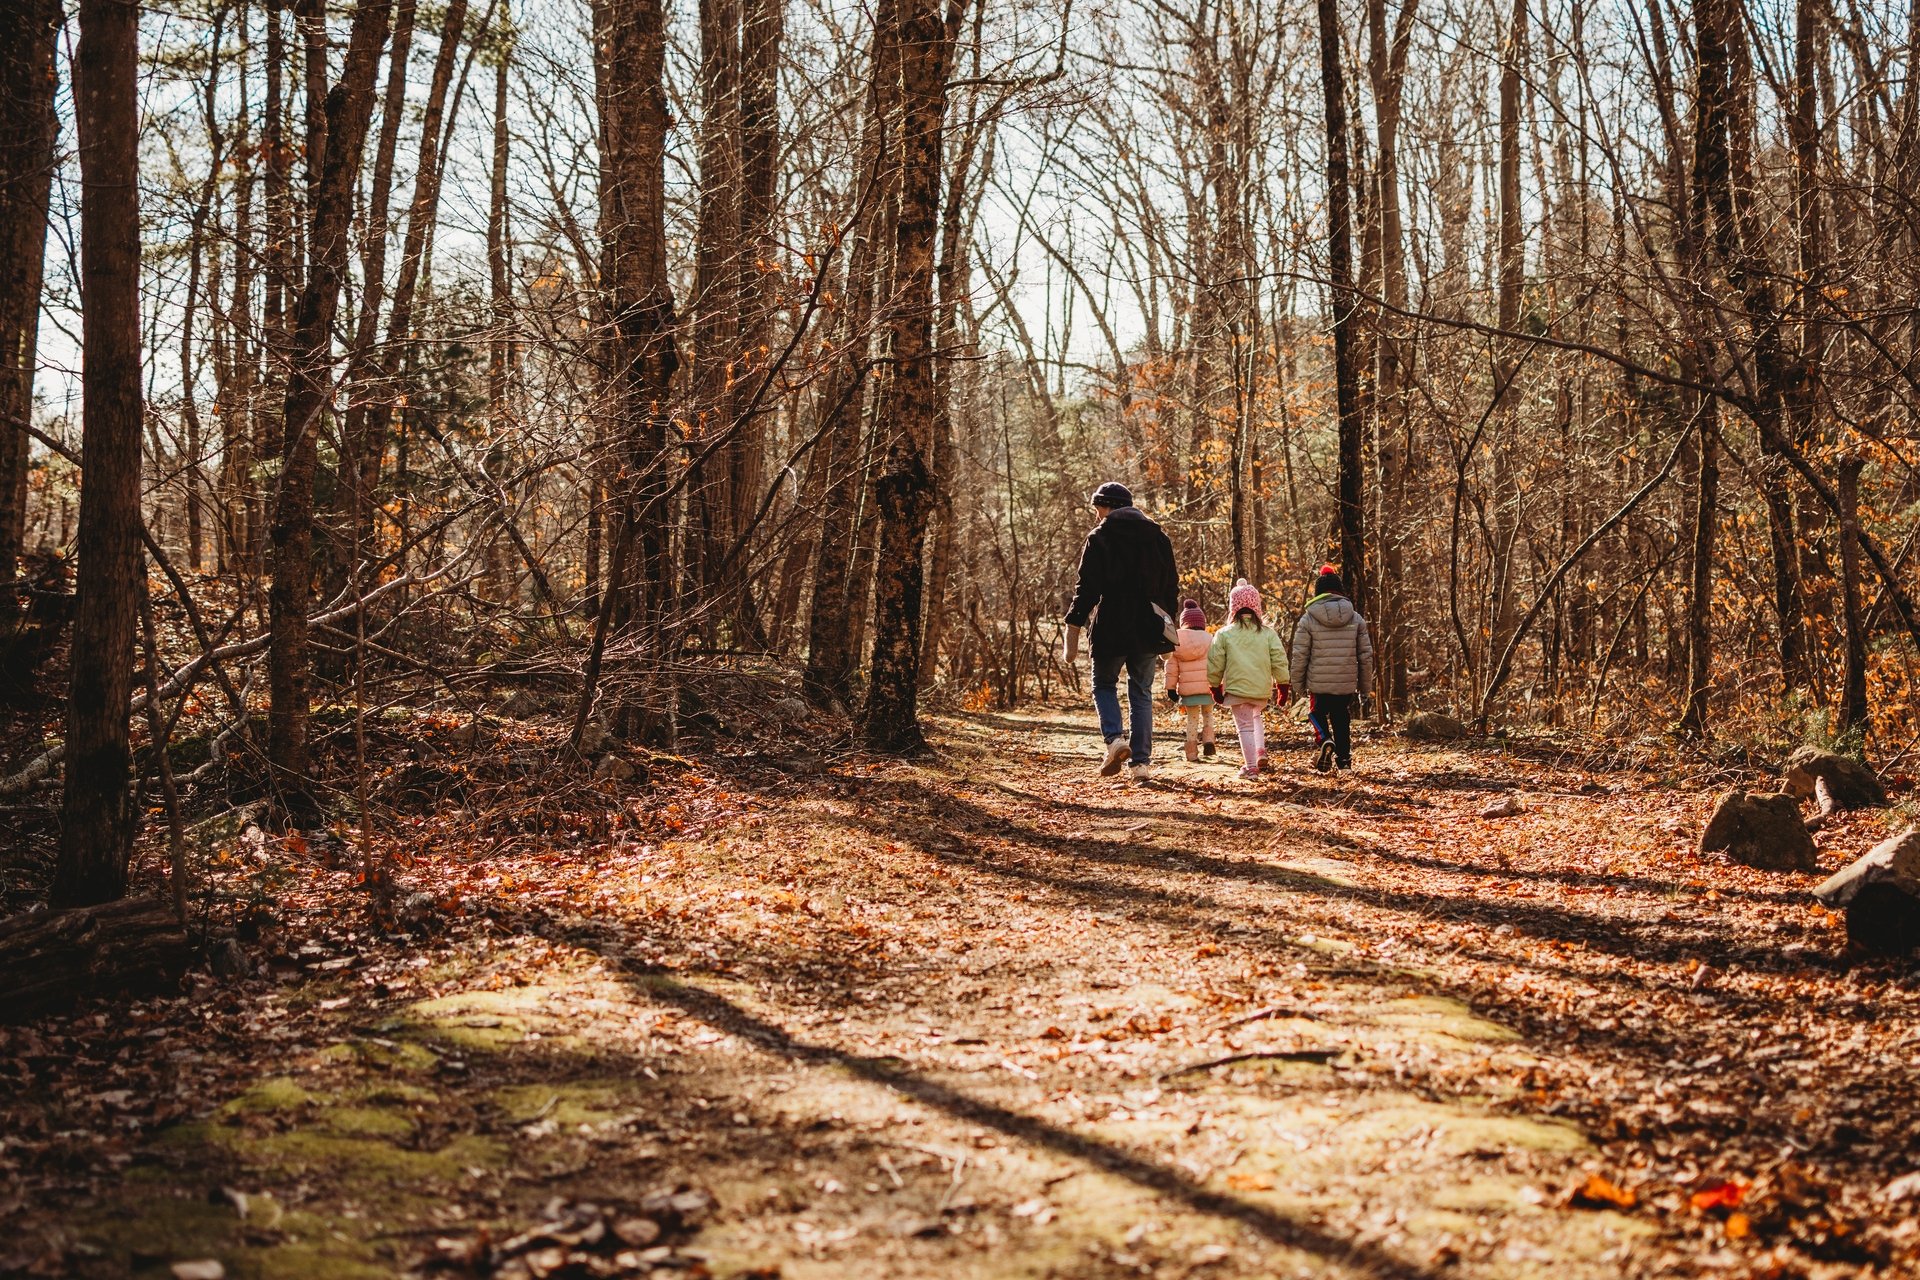 Family walking down trail surrounded by bare fall trees